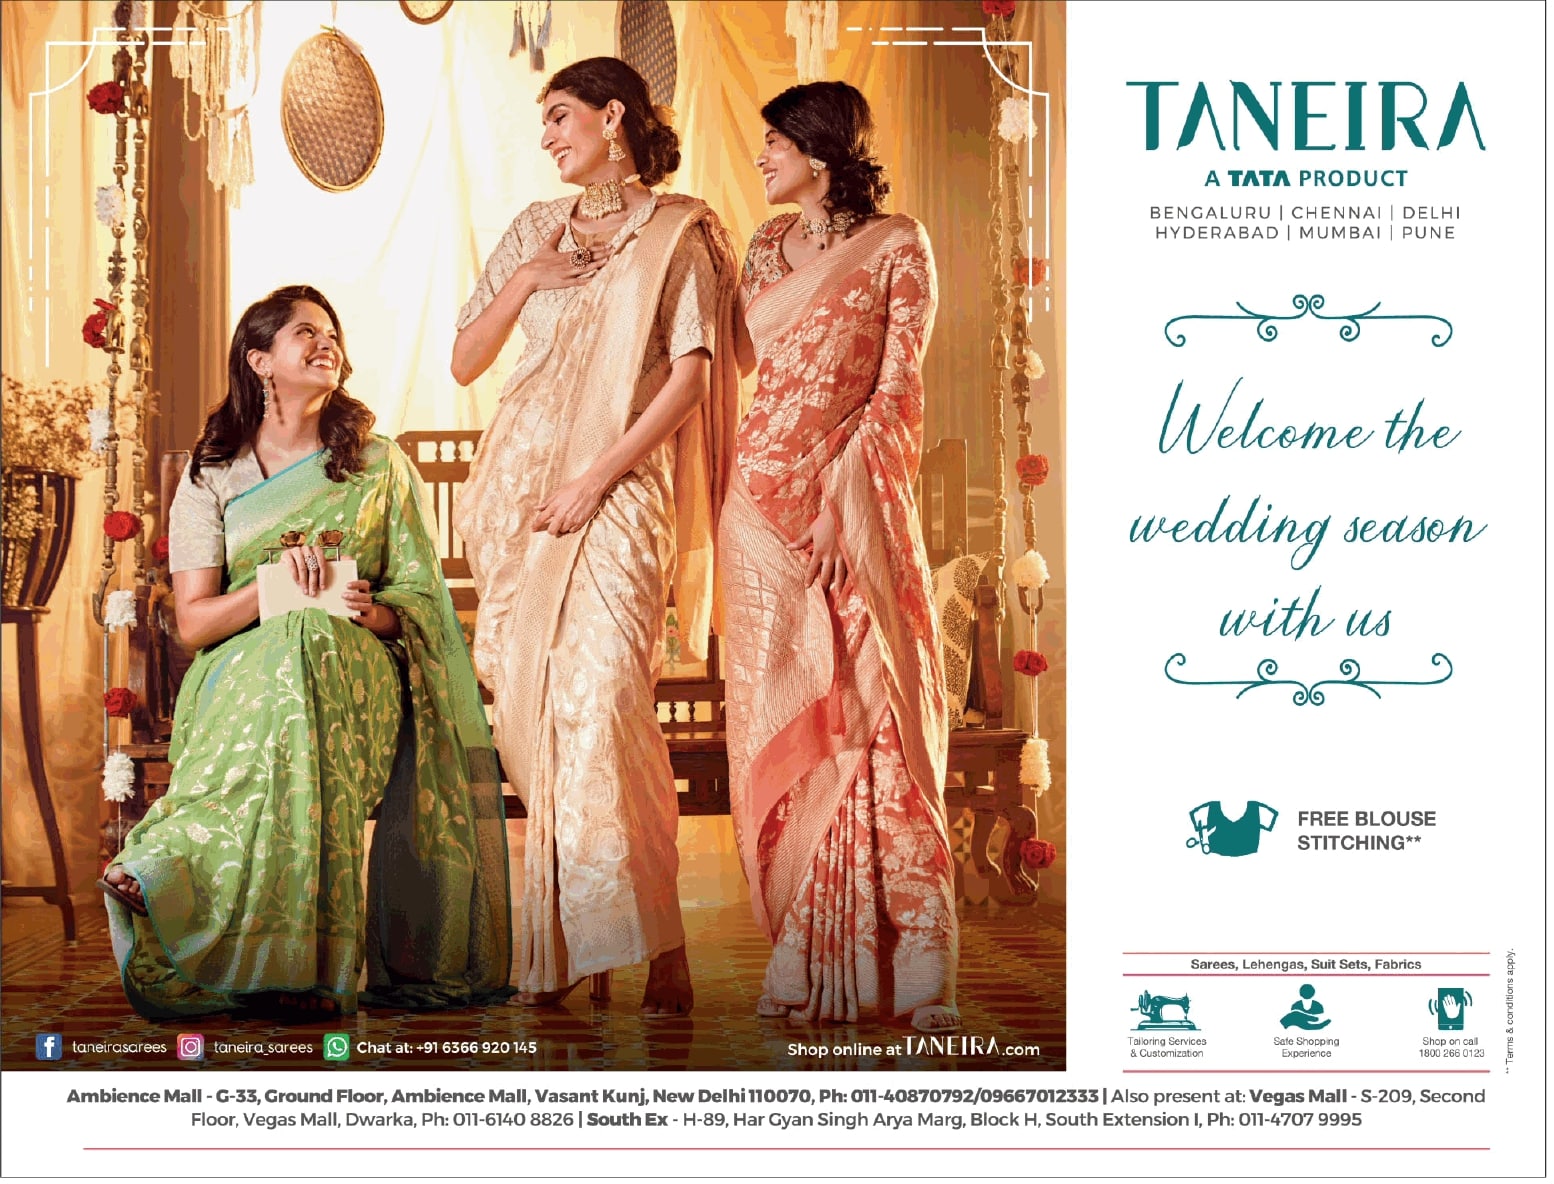 taneira-a-tata-product-welcome-the-wedding-season-with-us-ad-delhi-times-11-04-2021